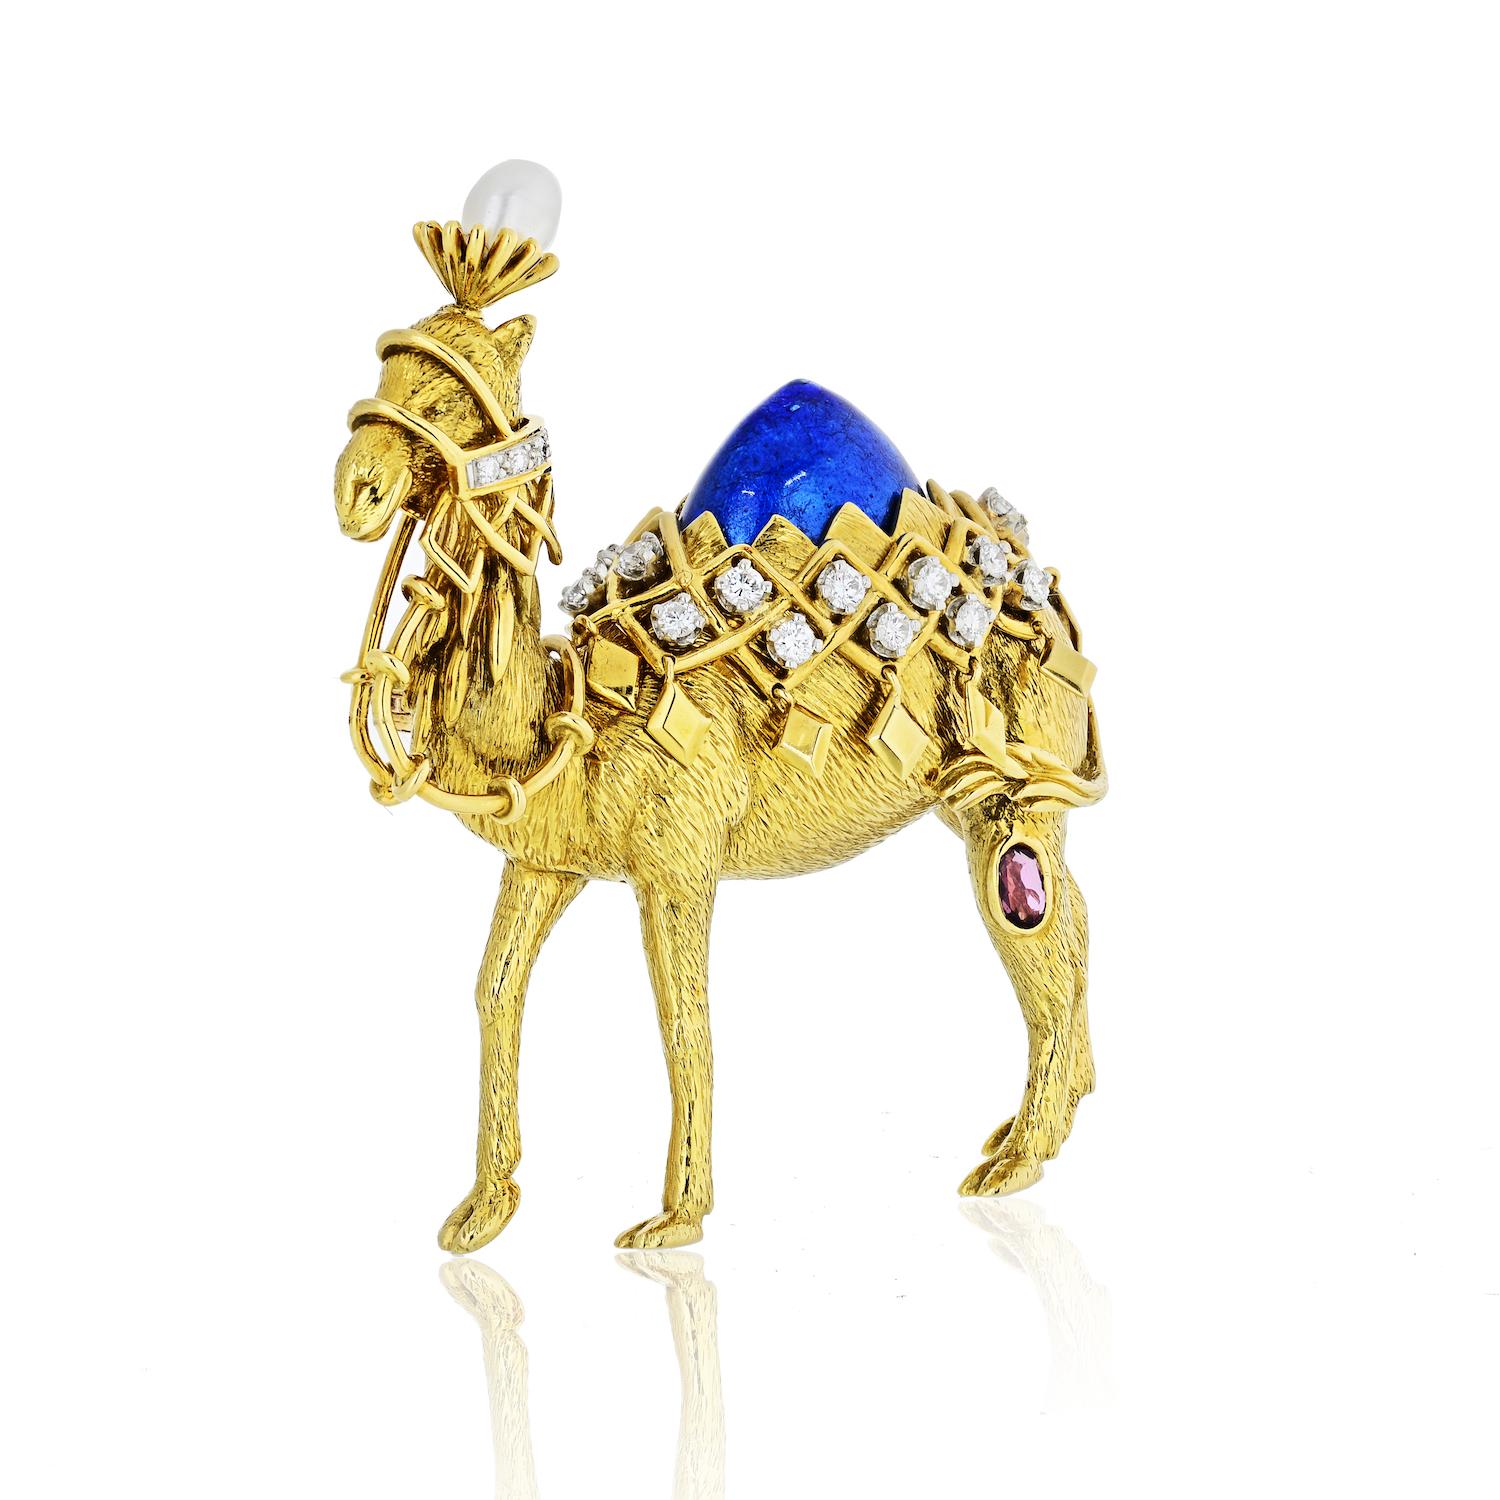 Designed by Jean Schlumberger for Tiffany & Co., this marvelous piece compels with its exquisite craftsmanship quality and lavish decor. The brooch depicts a camel and it is made of luxurious 18K yellow gold, embellished with ruby, pearl, and